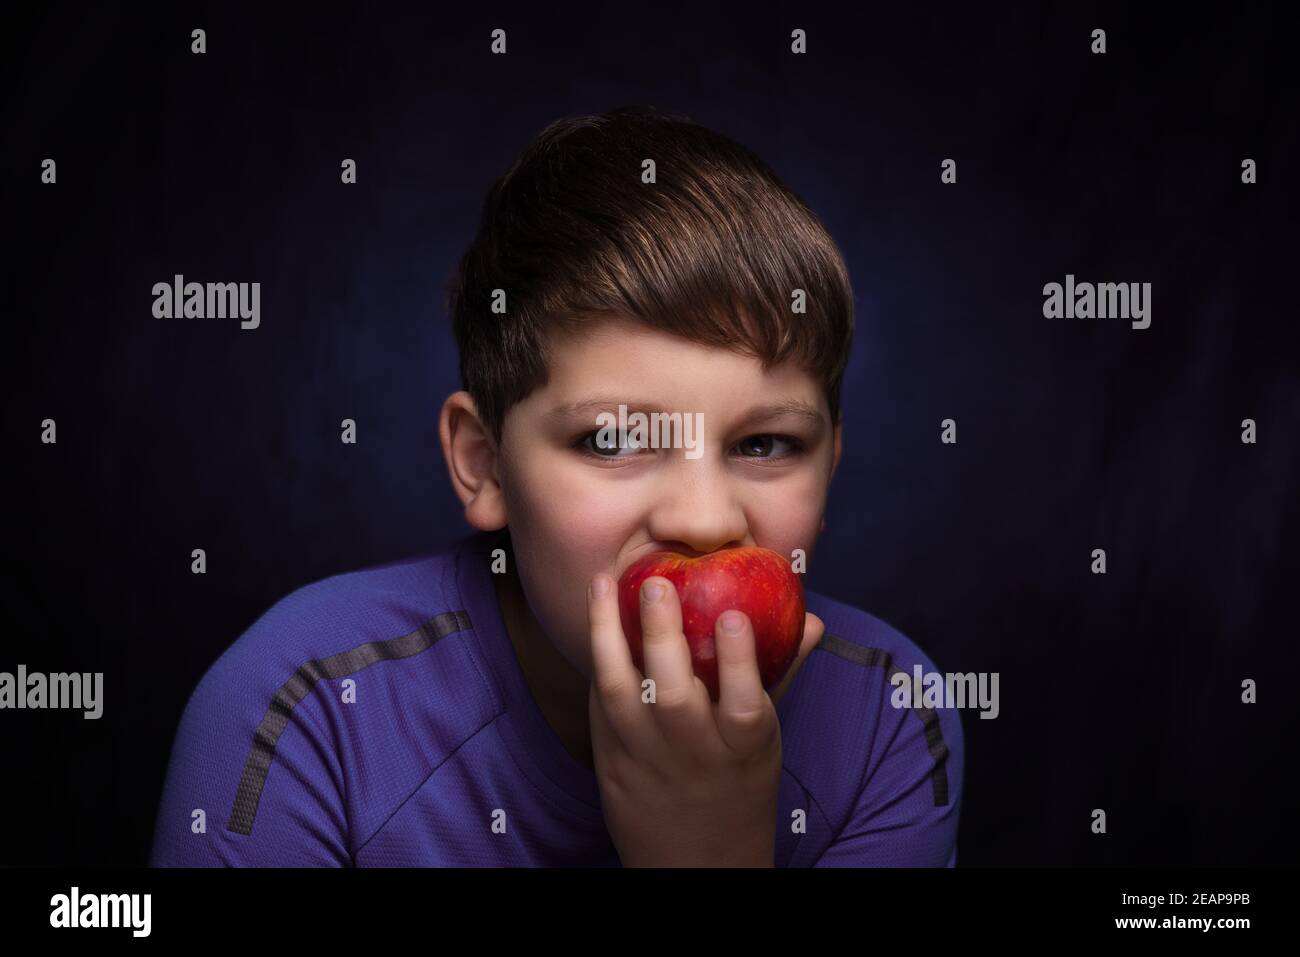 teenager boy with light brown hair and bangs, wearing a sports purple t-shirt eating a big red apple on an isolated background Stock Photo